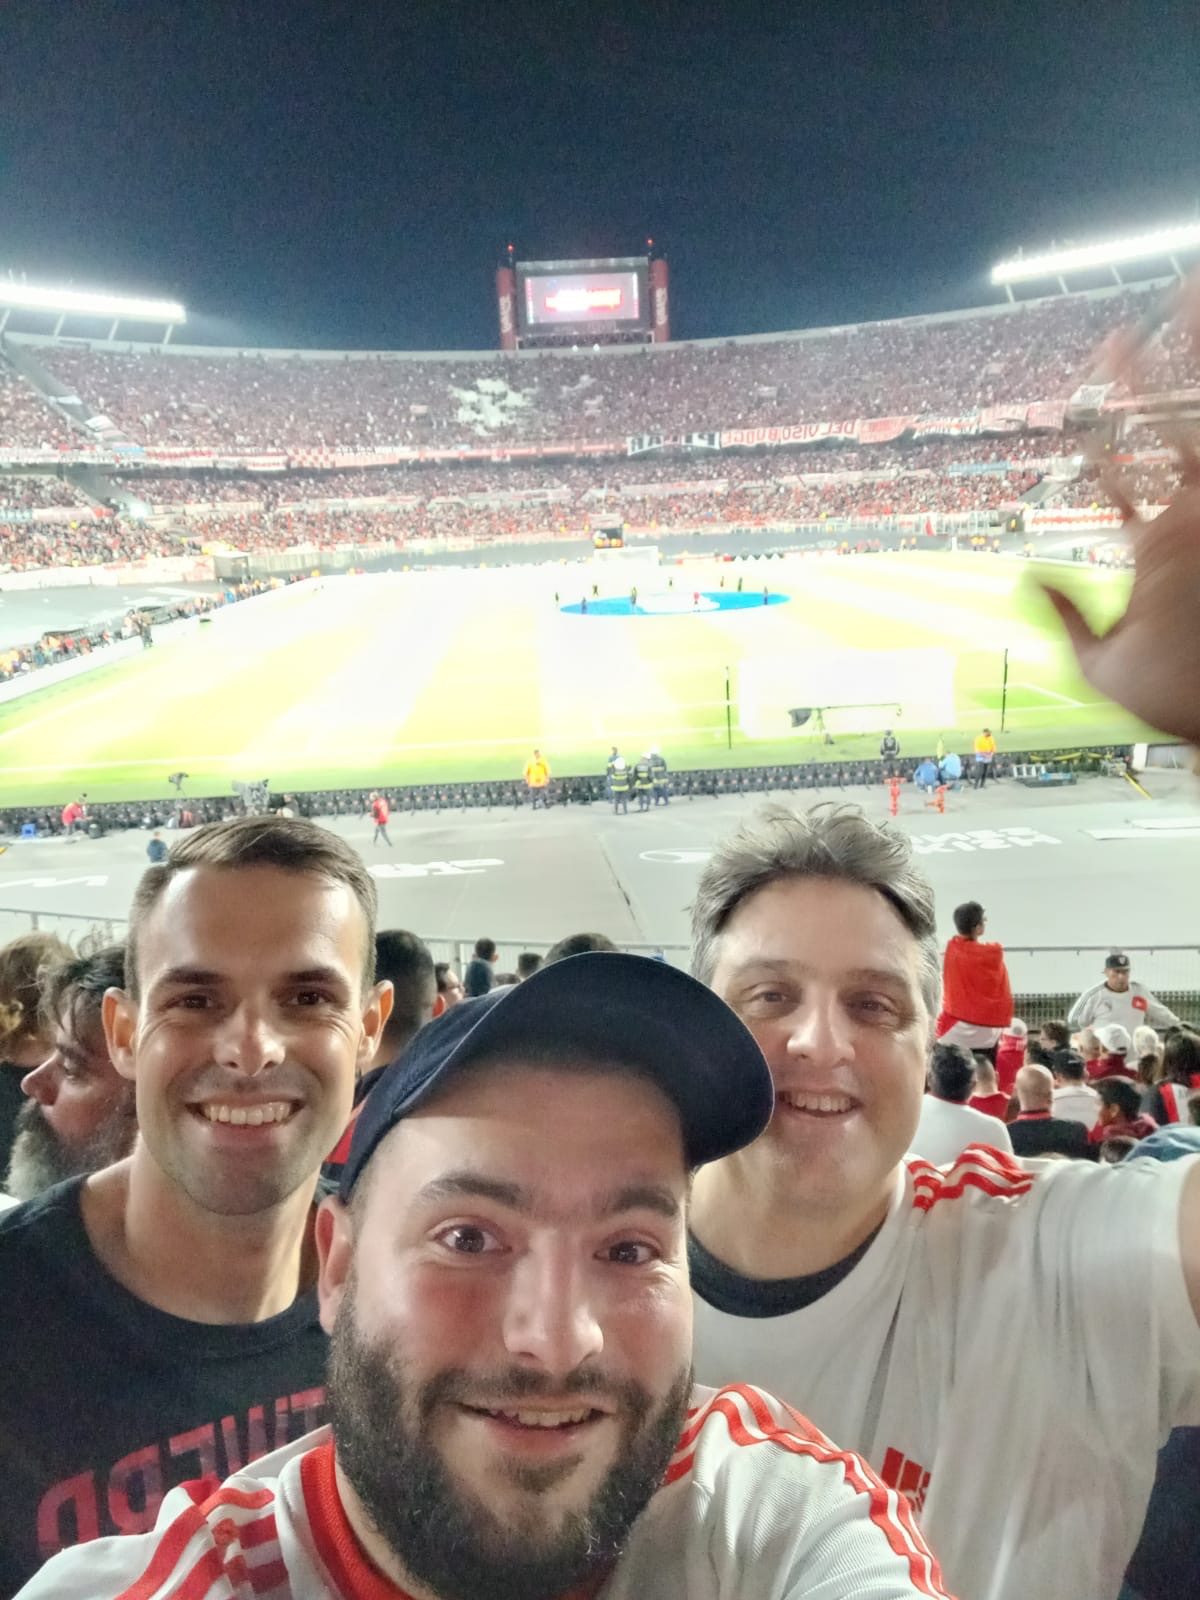 Day 7 - River Matchday Experience